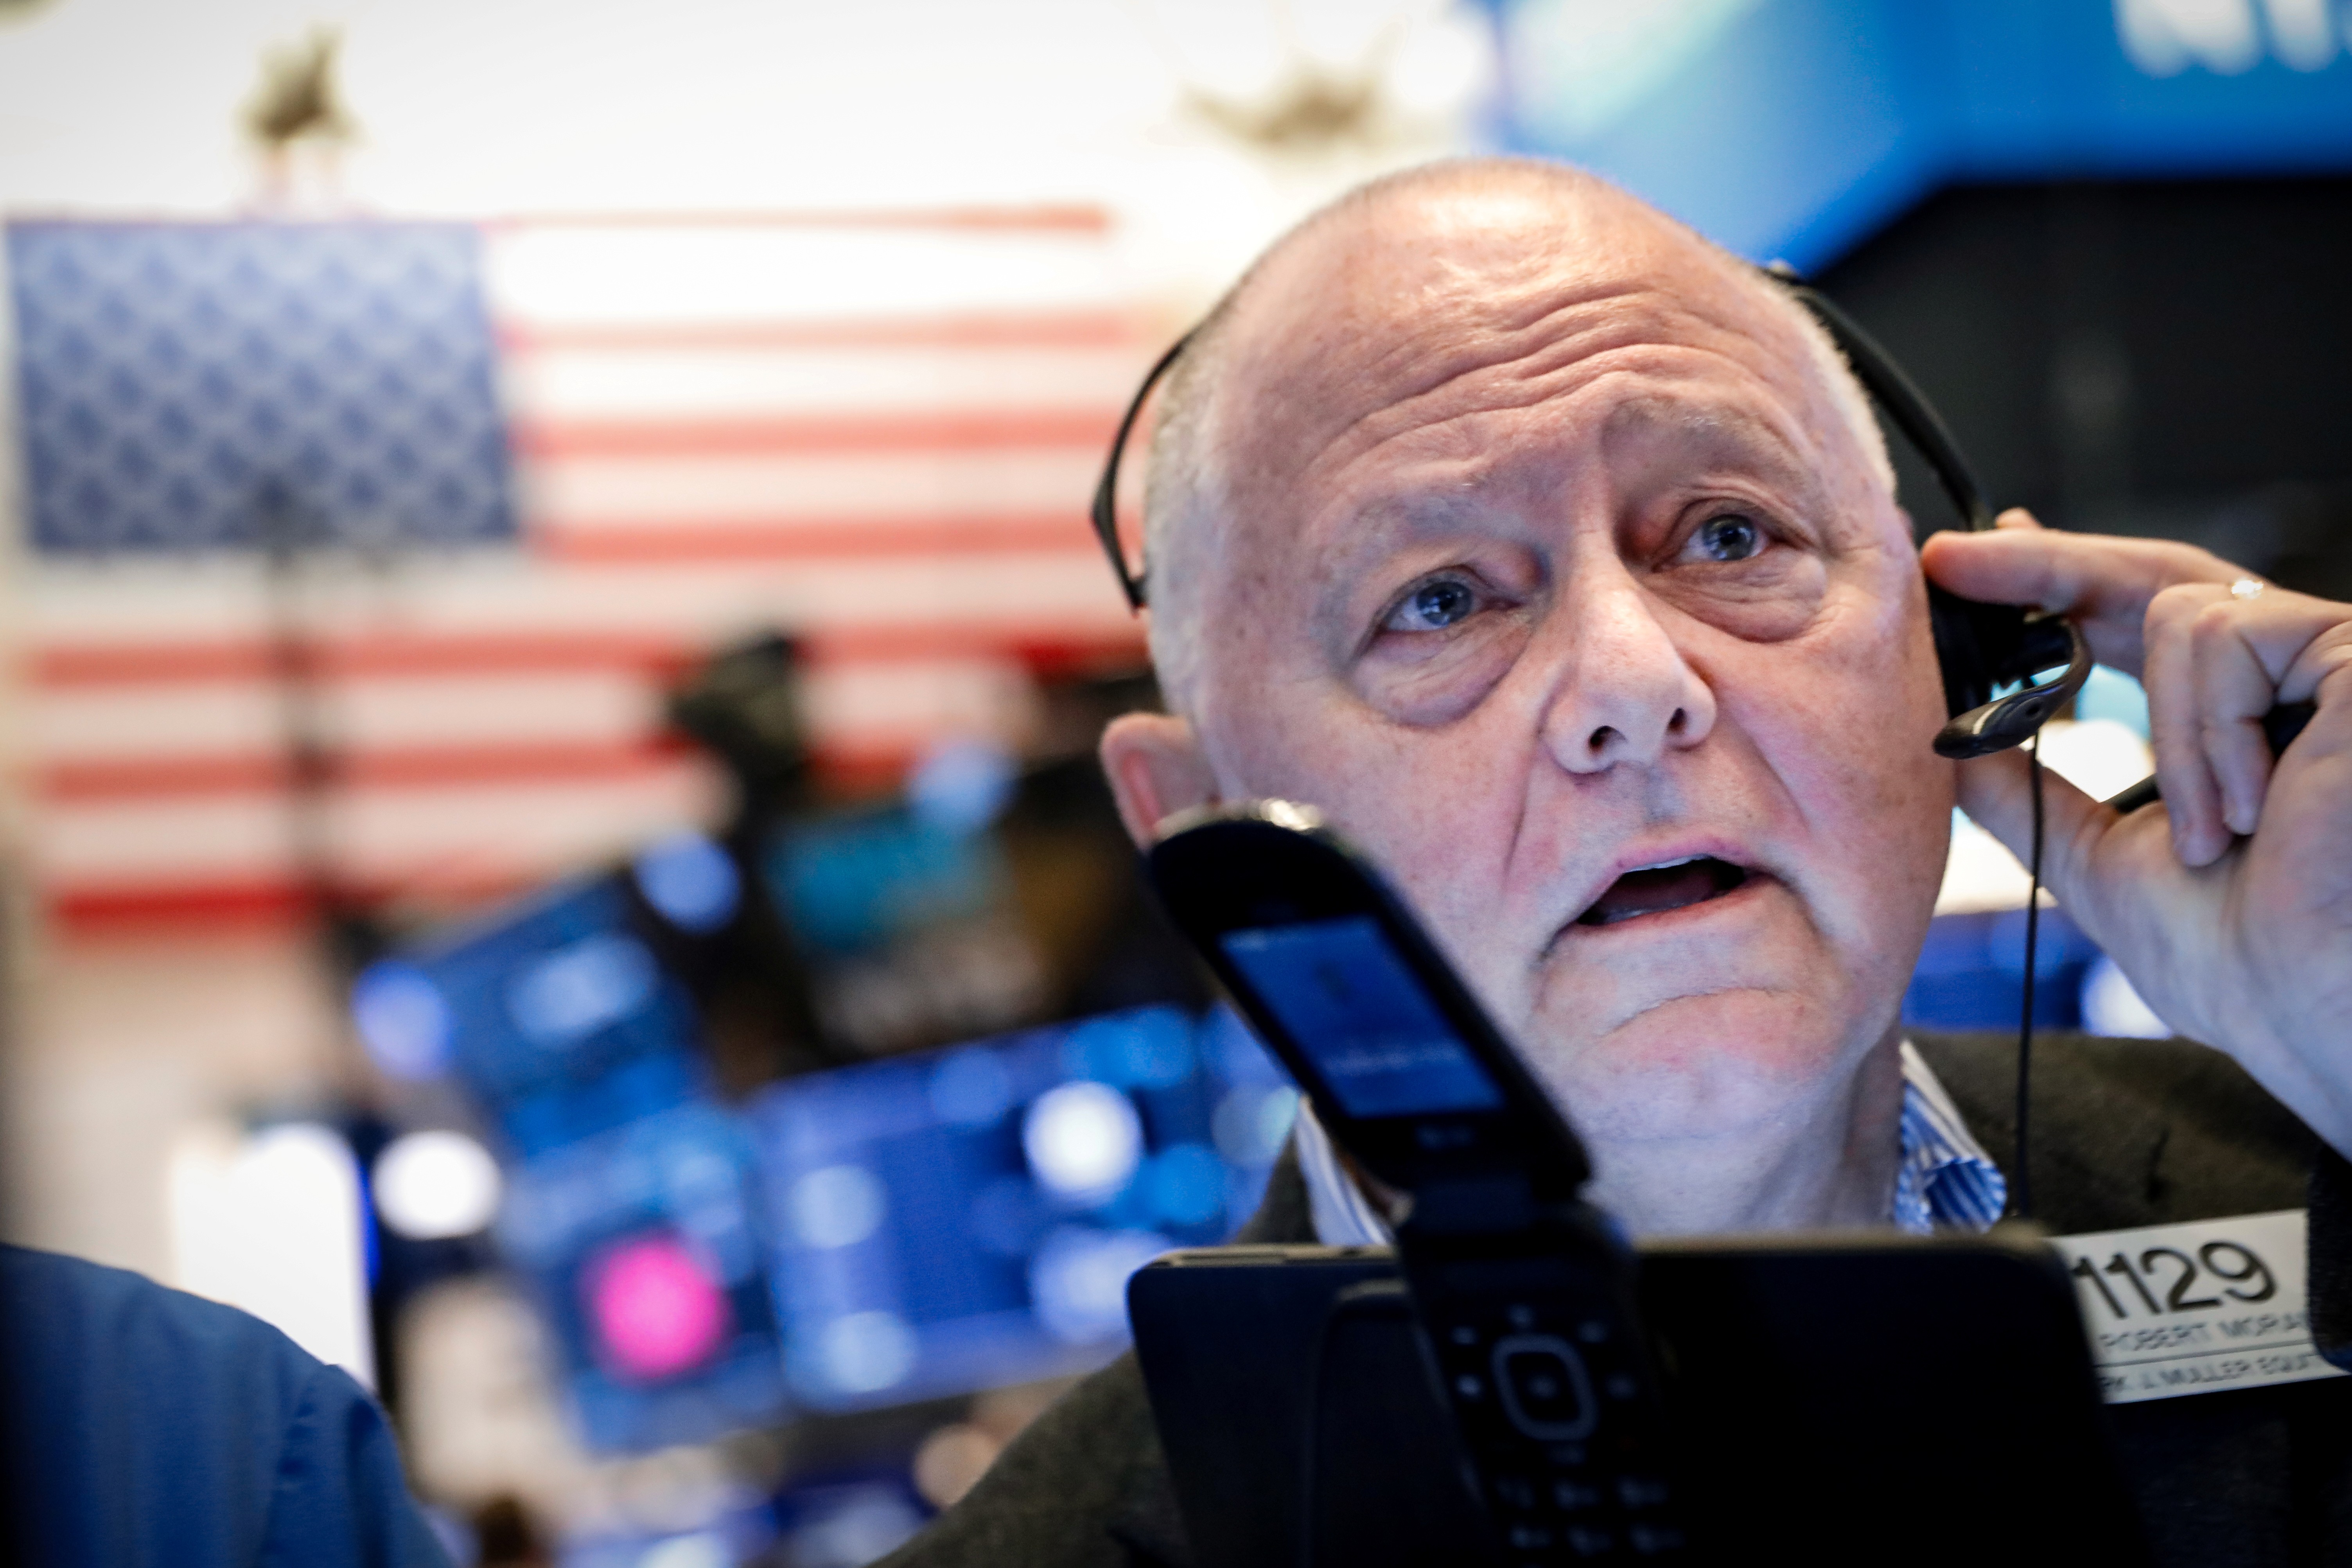 A trader works on the floor of the New York Stock Exchange. With every tit-for-tat move of the US-China trade stand-off, market reactions follow a familiar path. Photo: AFP